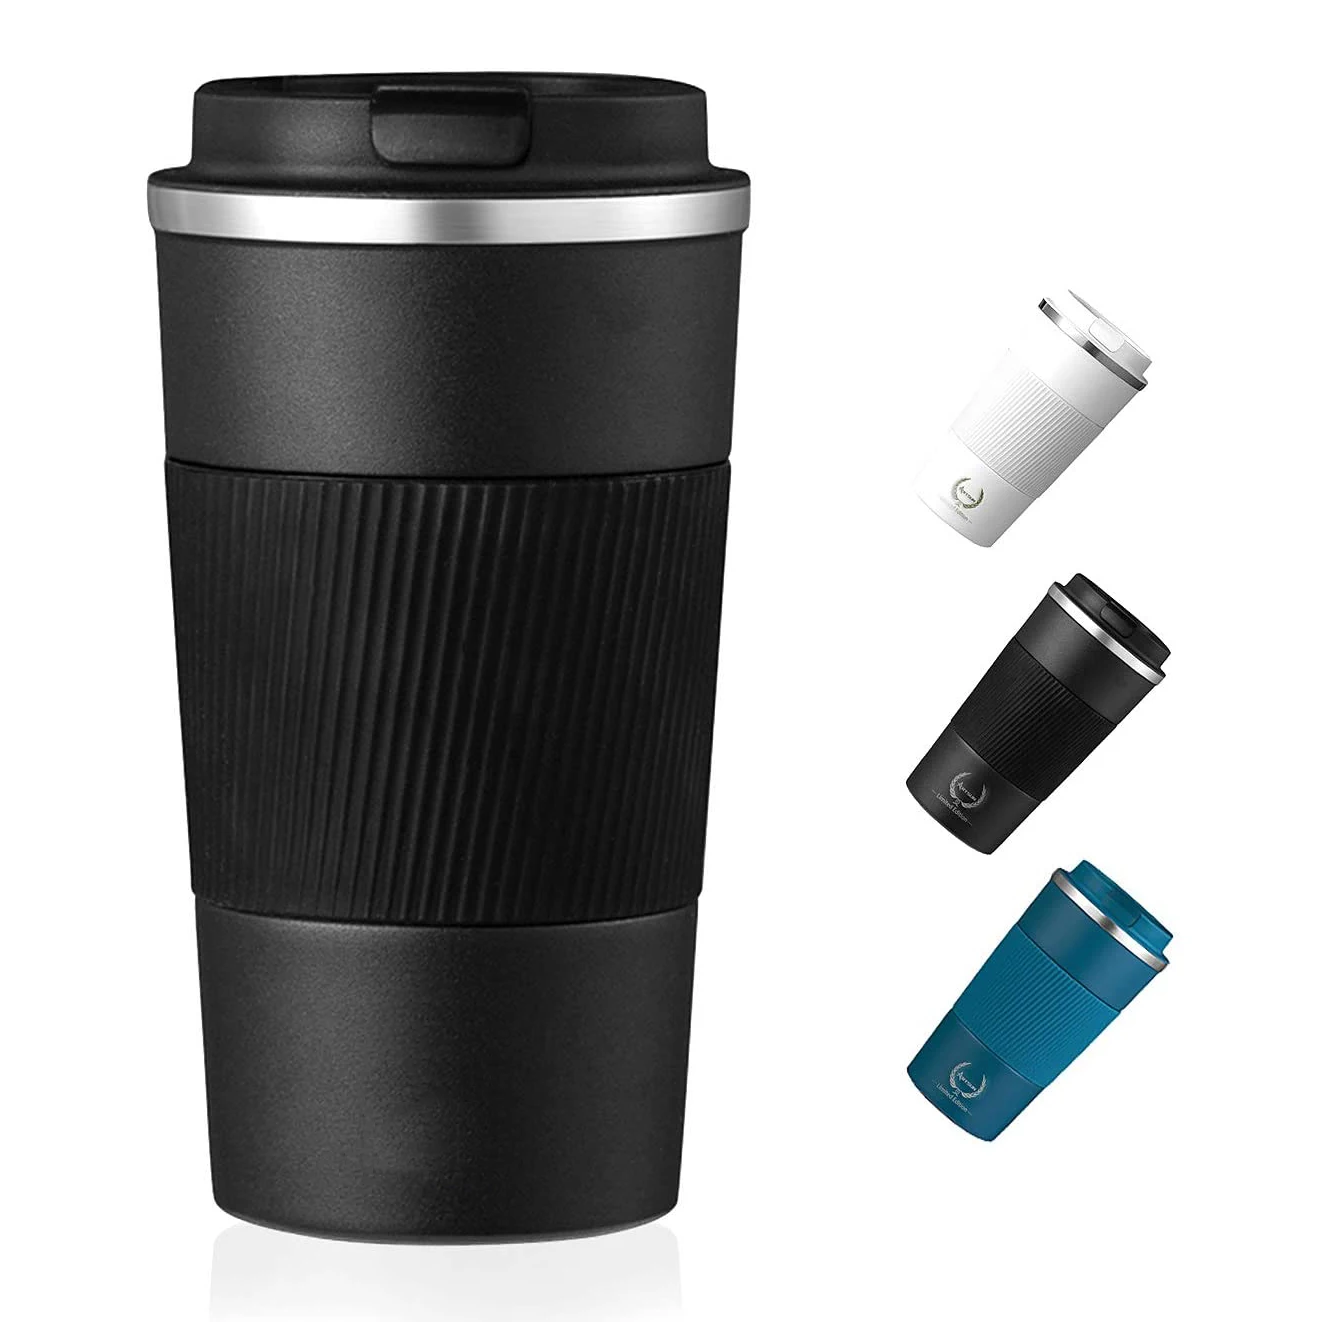 

Tumbler Insulated Coffee Cup Stainless Steel Coffee Tumbler for Women Coffee Thermos Travel Mug with Lid gifts Reusable, Black, white, blue, green ,red